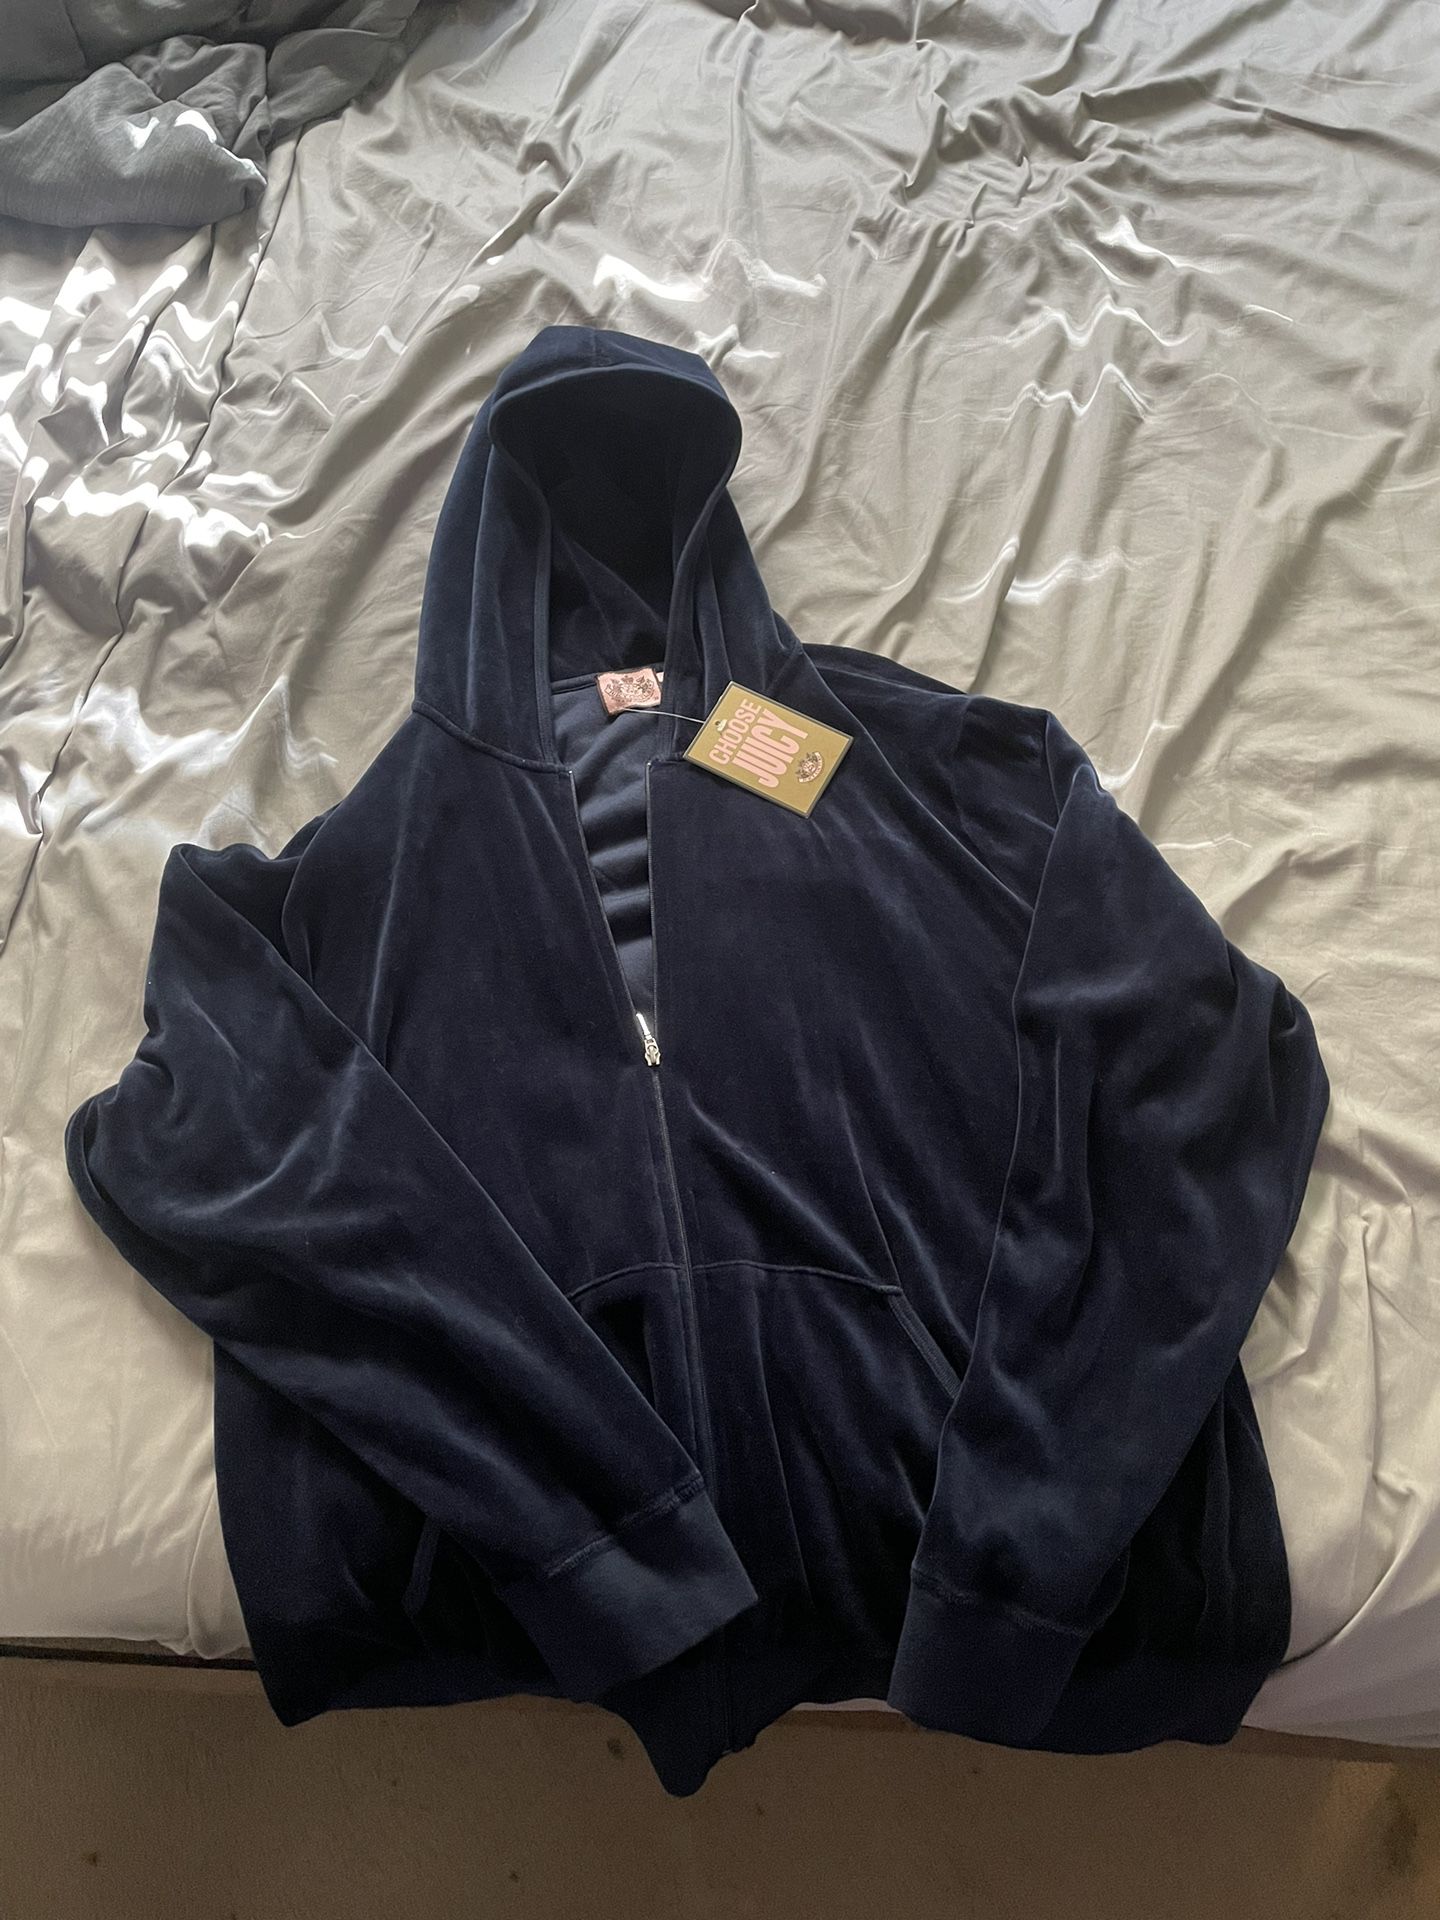 Juicy Couture Zip Up Hoodie for Sale in Anaheim, CA - OfferUp